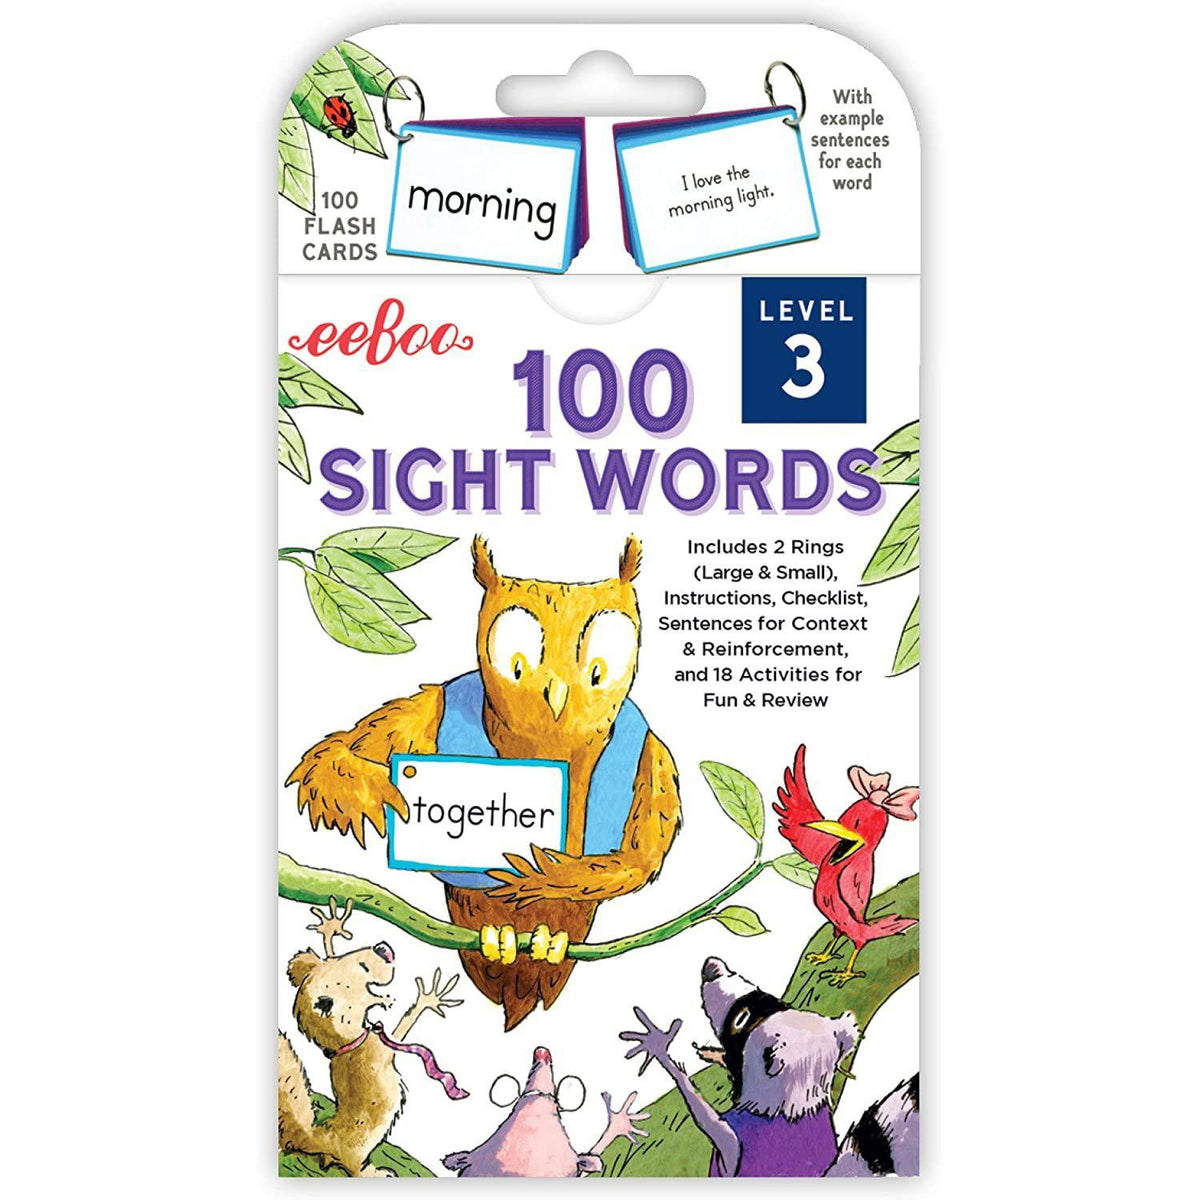 Flash Cards - 100 Sight Words - Level 3-The Arts-EeBoo-Yellow Springs Toy Company